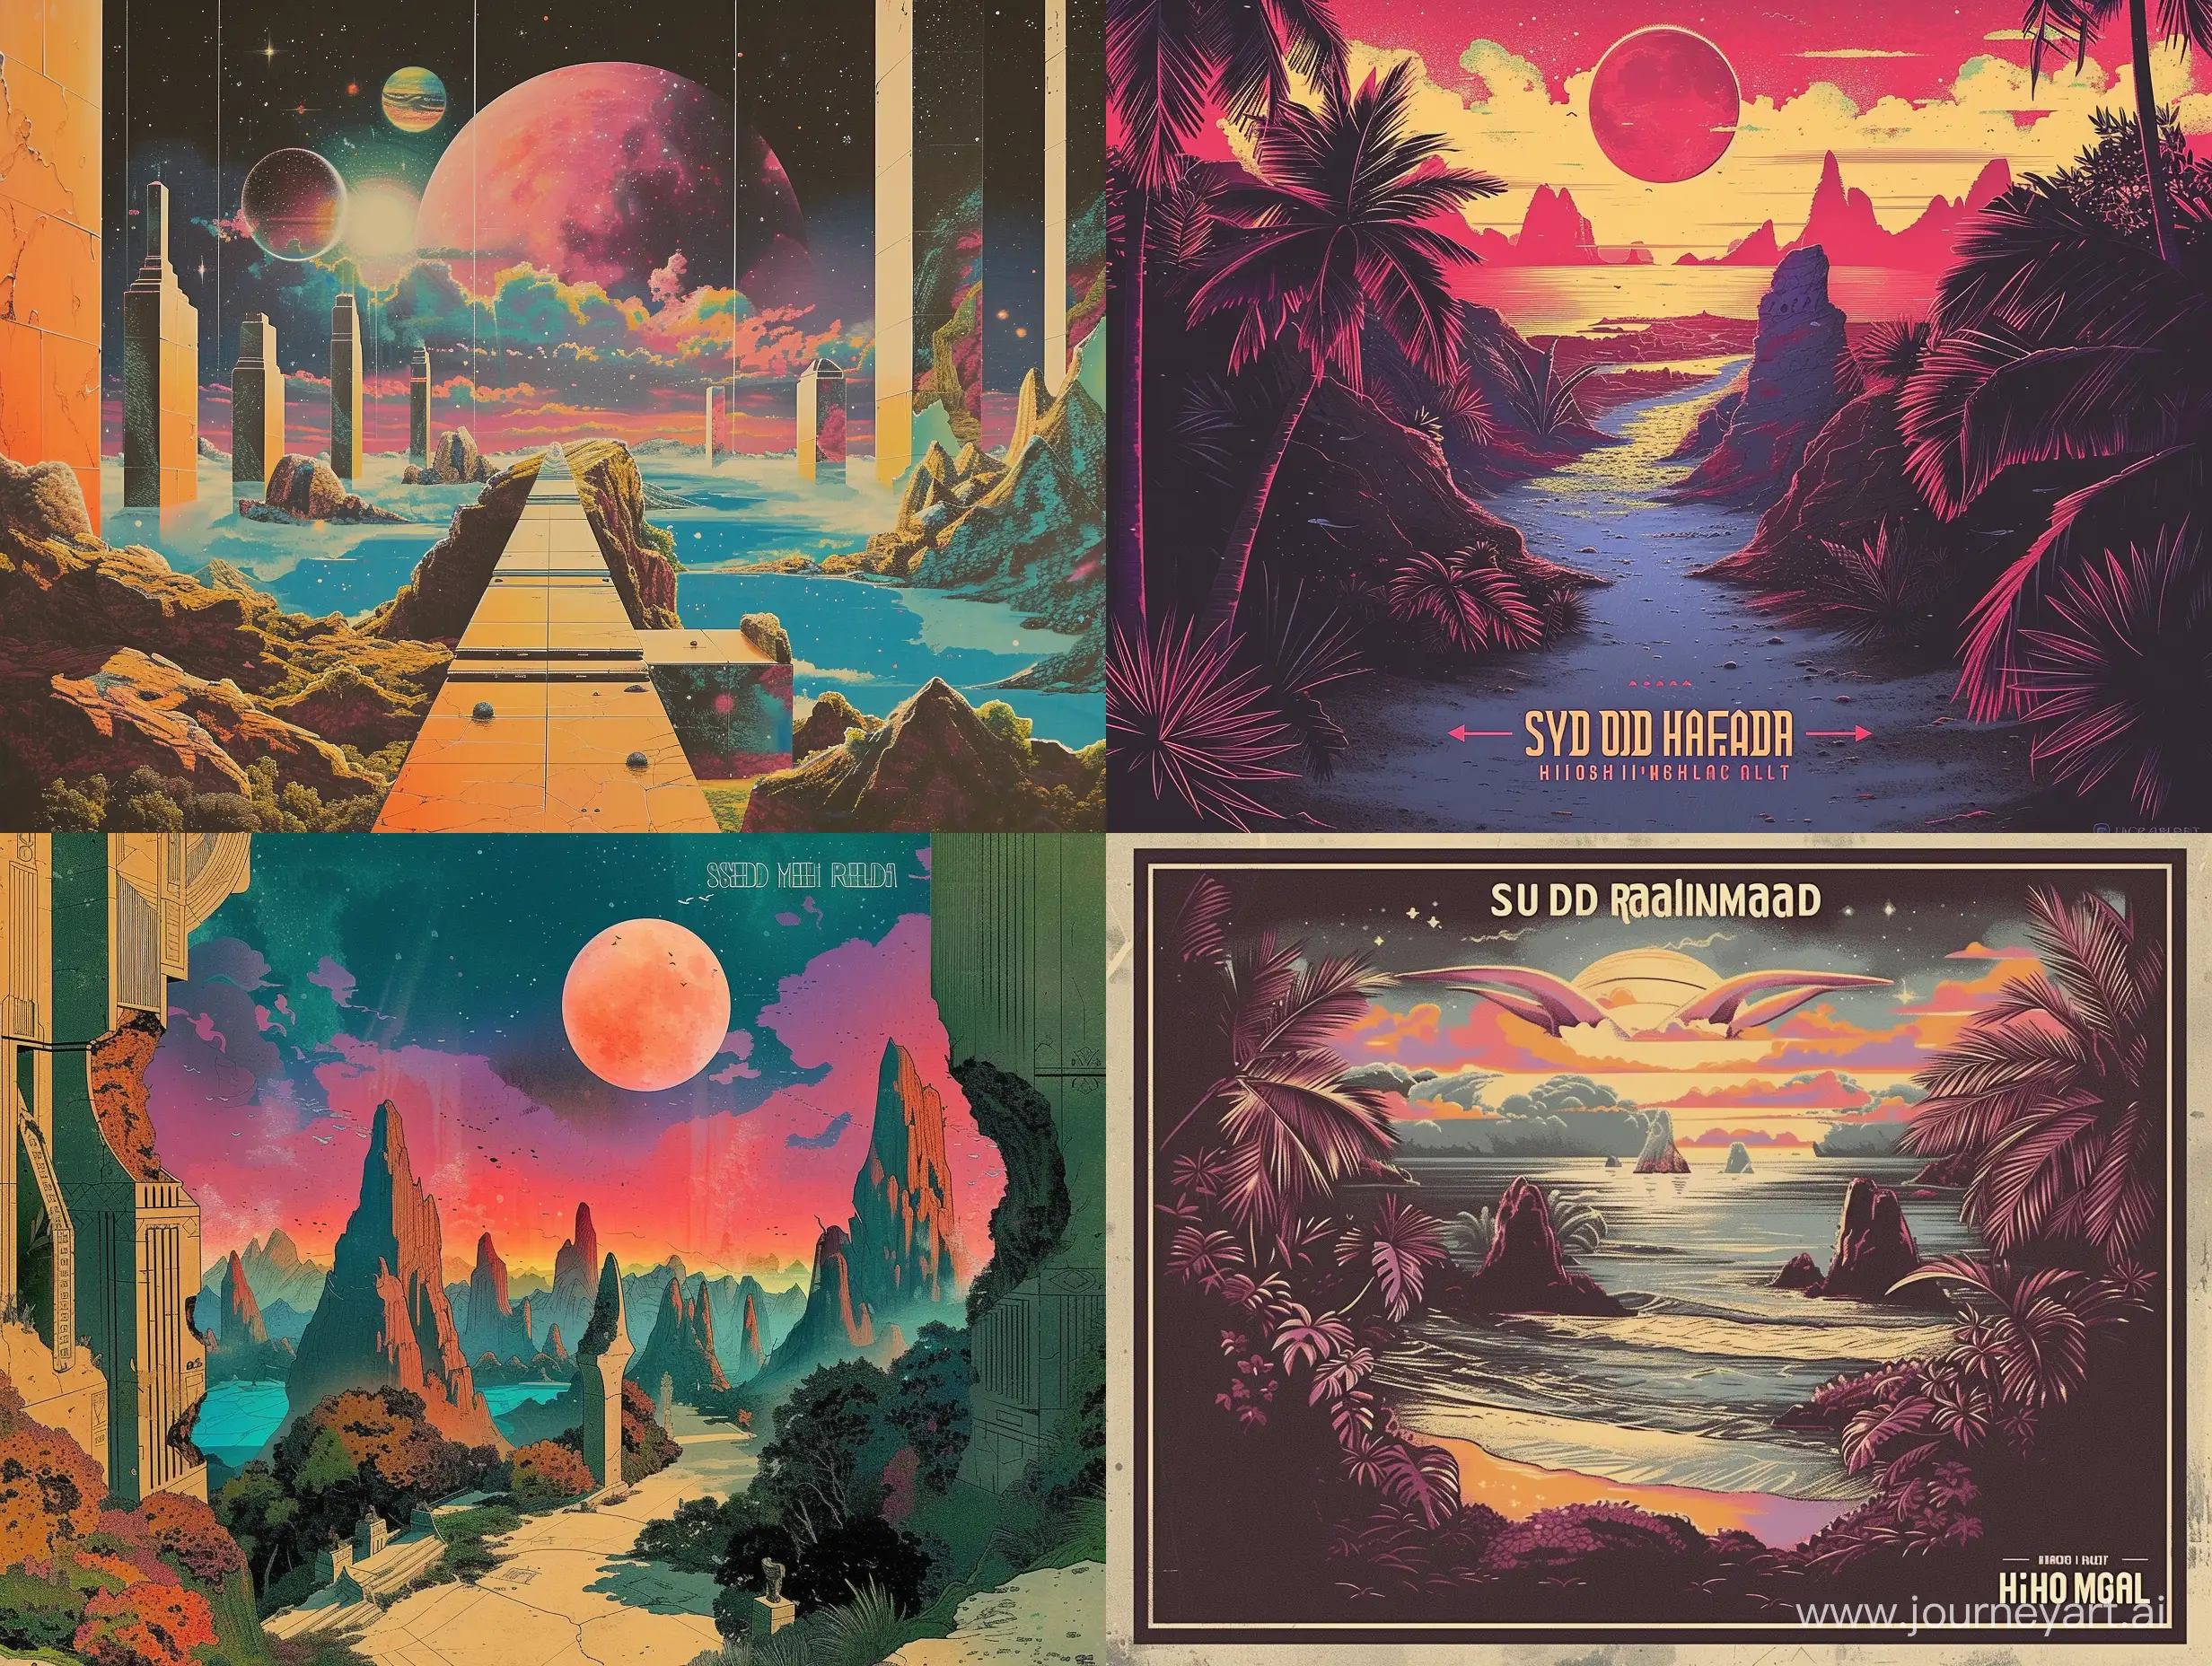 Chill-Synthwave-Retro-Artwork-Poster-with-Surreal-Nostalgia